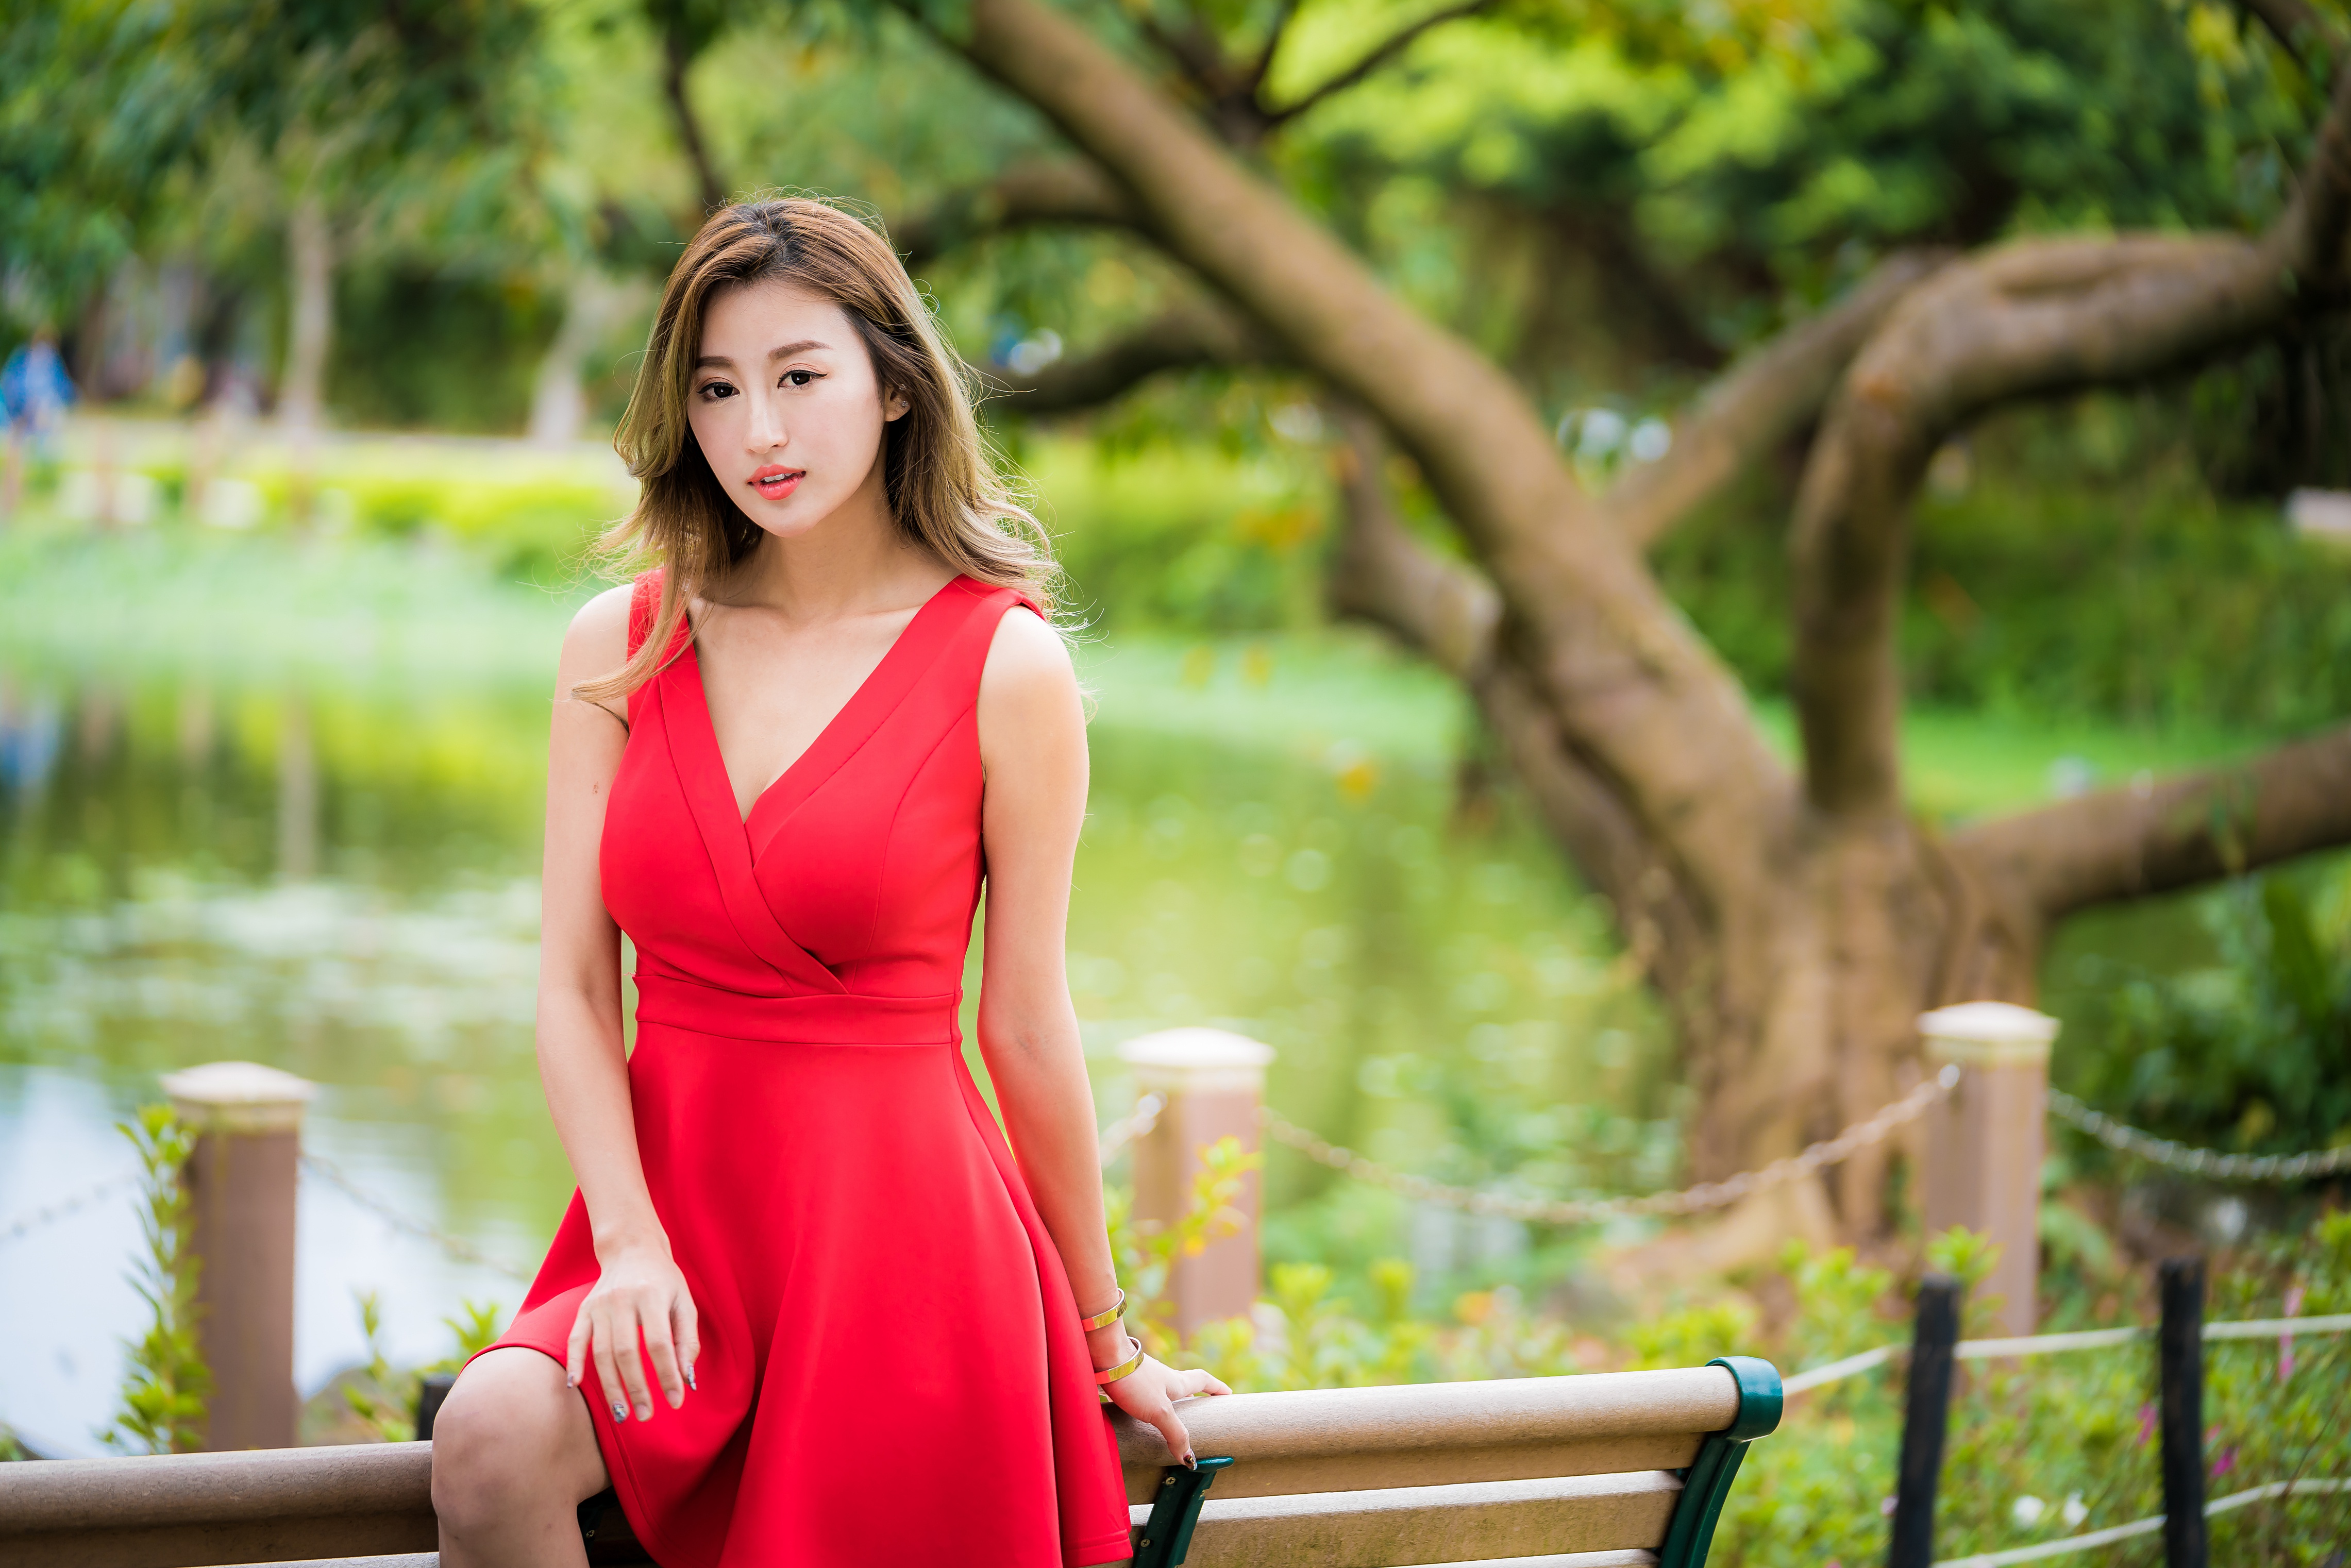 People 4562x3043 Asian women model red dress depth of field plants trees sitting bench pond bracelets brunette long hair chains women outdoors looking at viewer